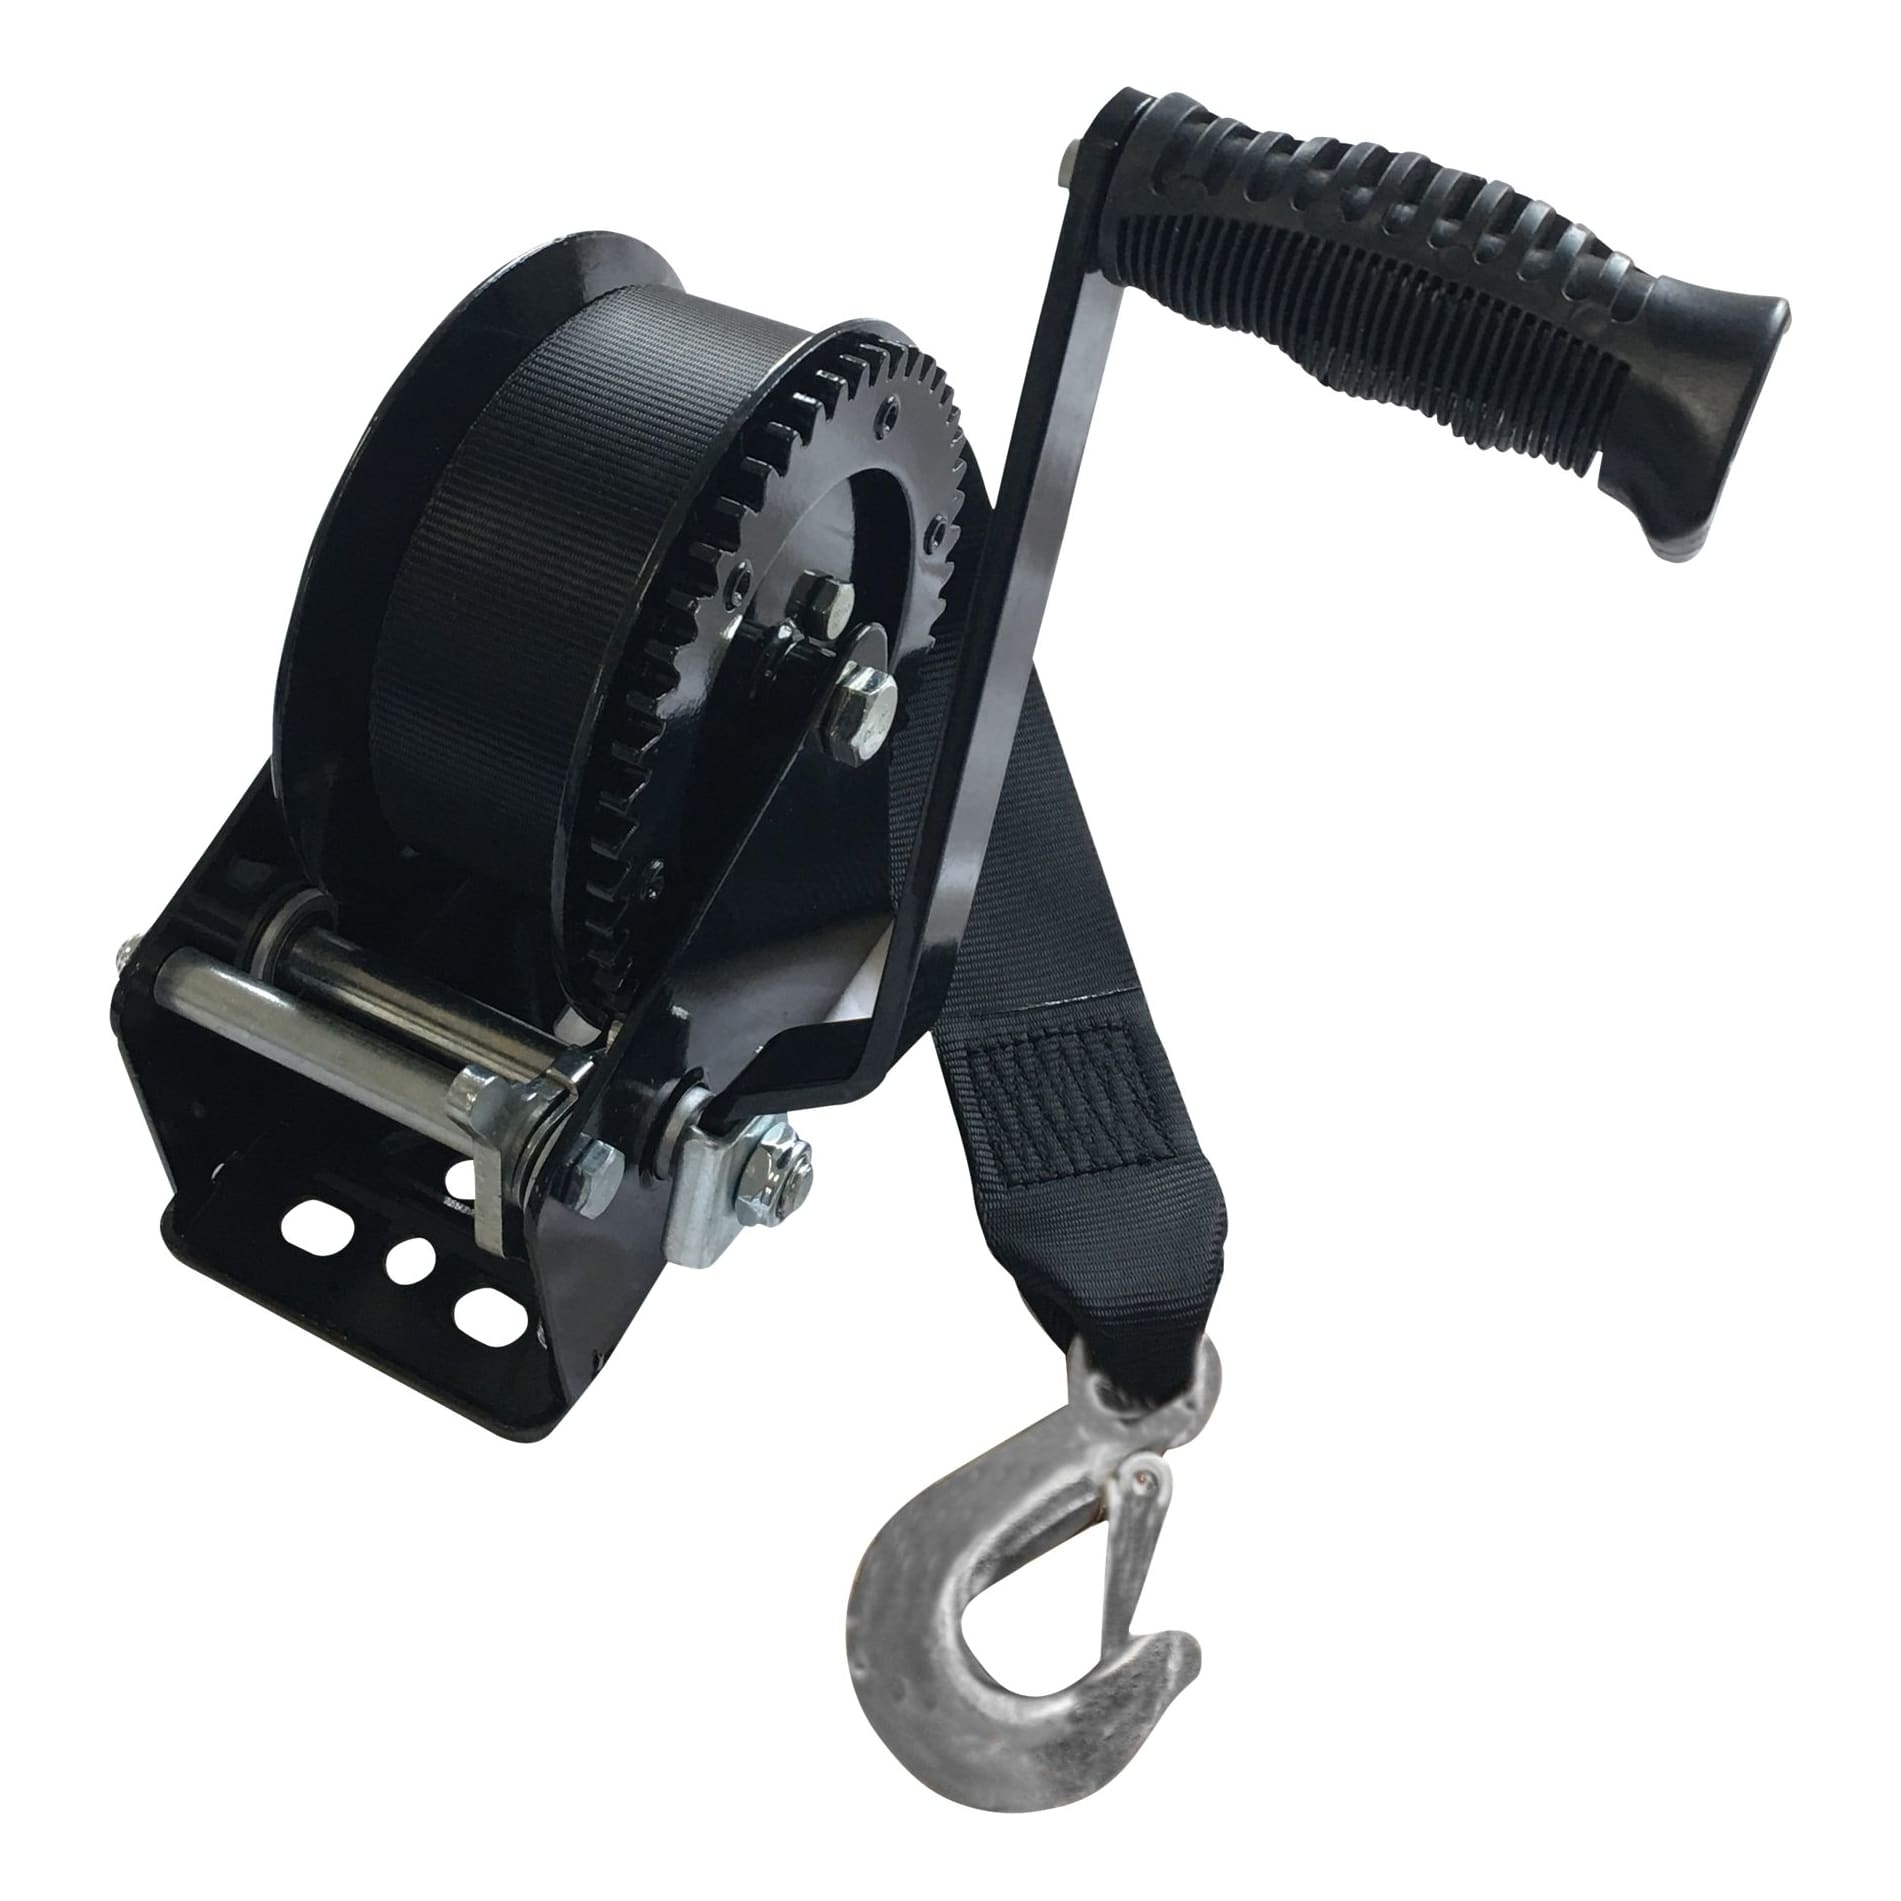 Bass Pro Shops Trailer Winch with Strap - Cabelas - BASS PRO 